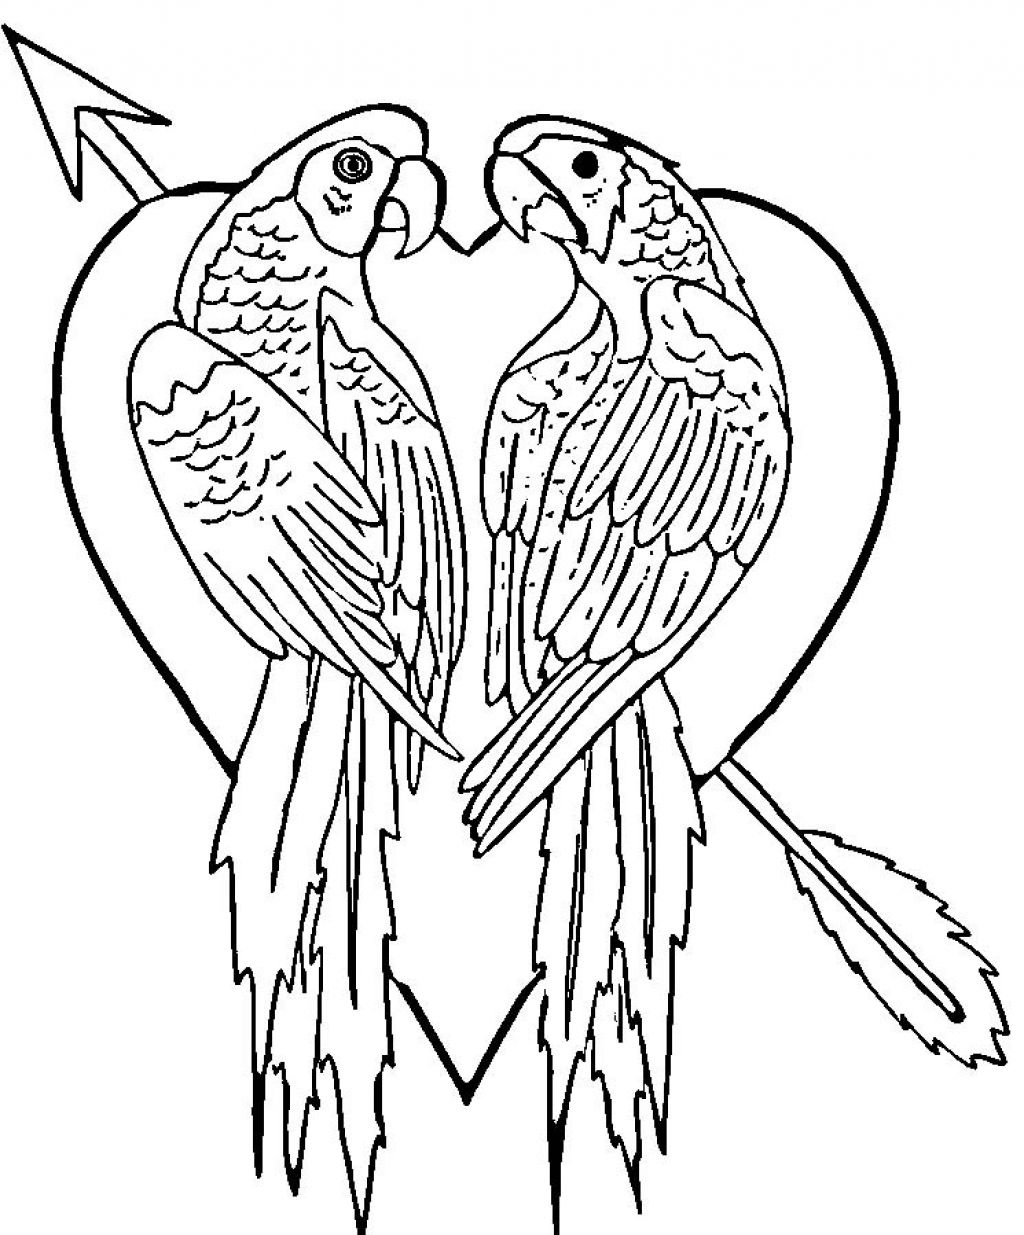 Free Printable Parrot Coloring Pages For Kids - Free Printable Parrot Coloring Pages